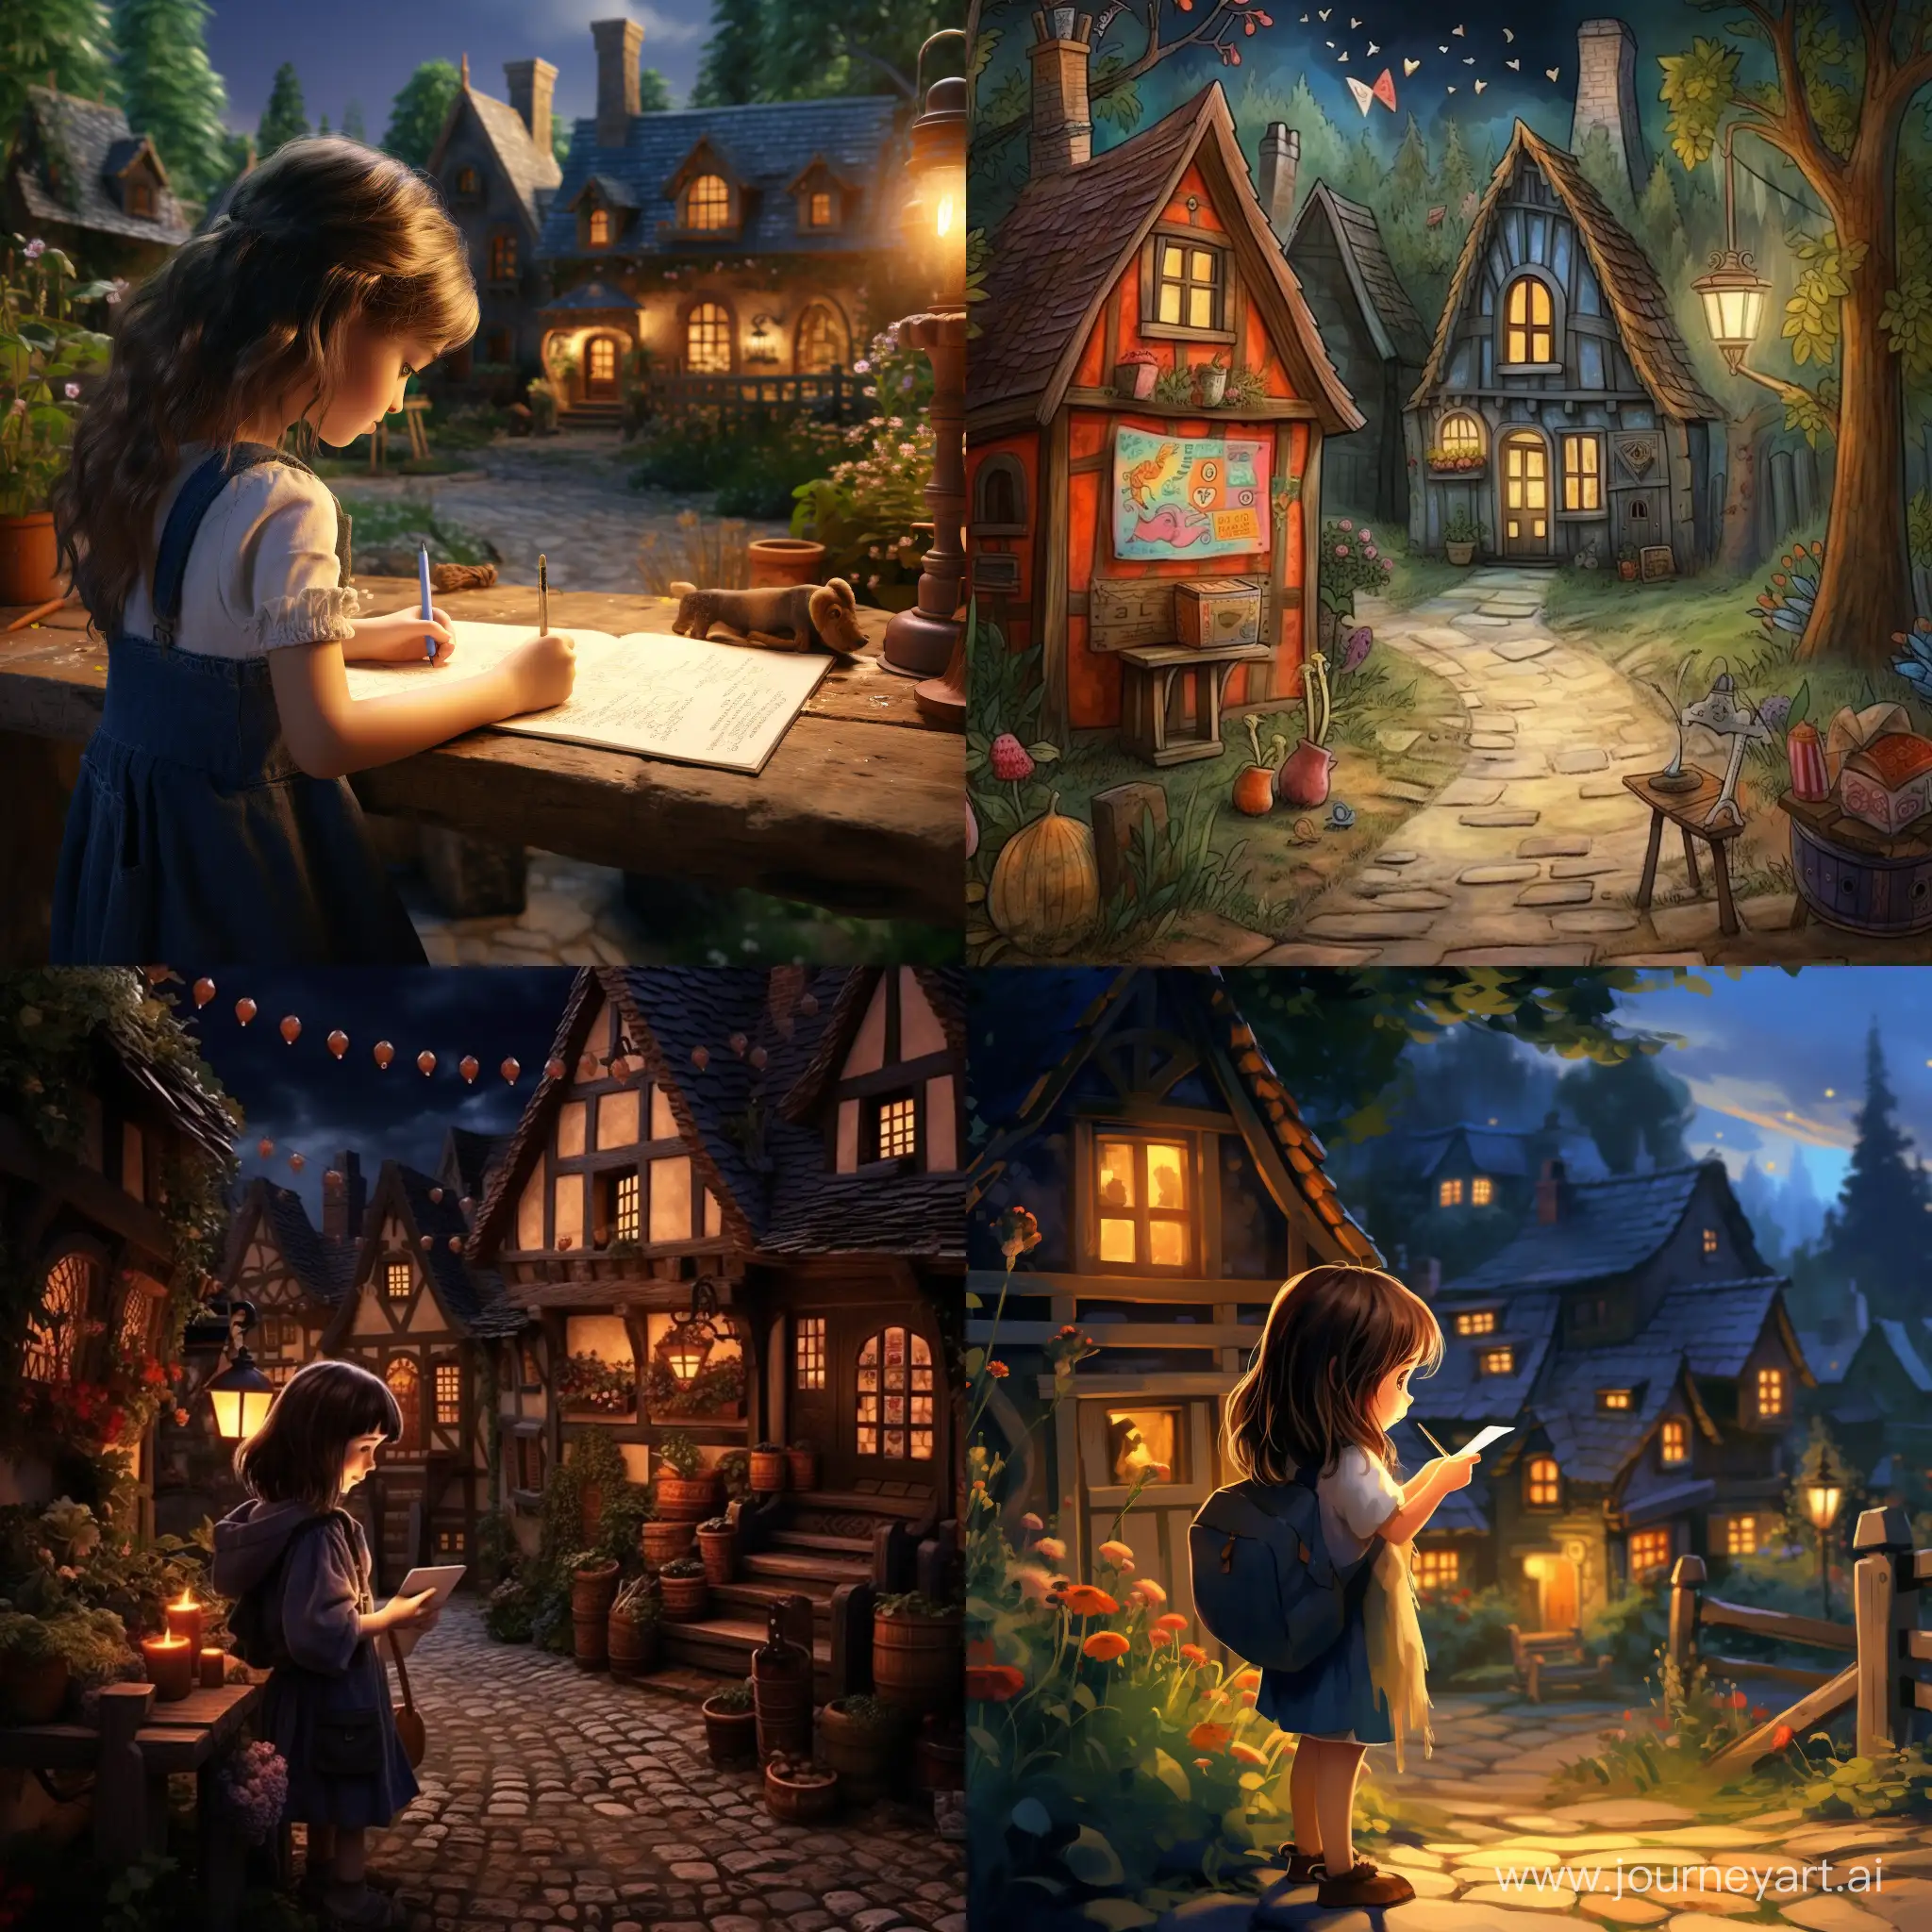 Lily-Discovers-Enchantment-with-a-Magic-Pen-in-a-Quaint-Village